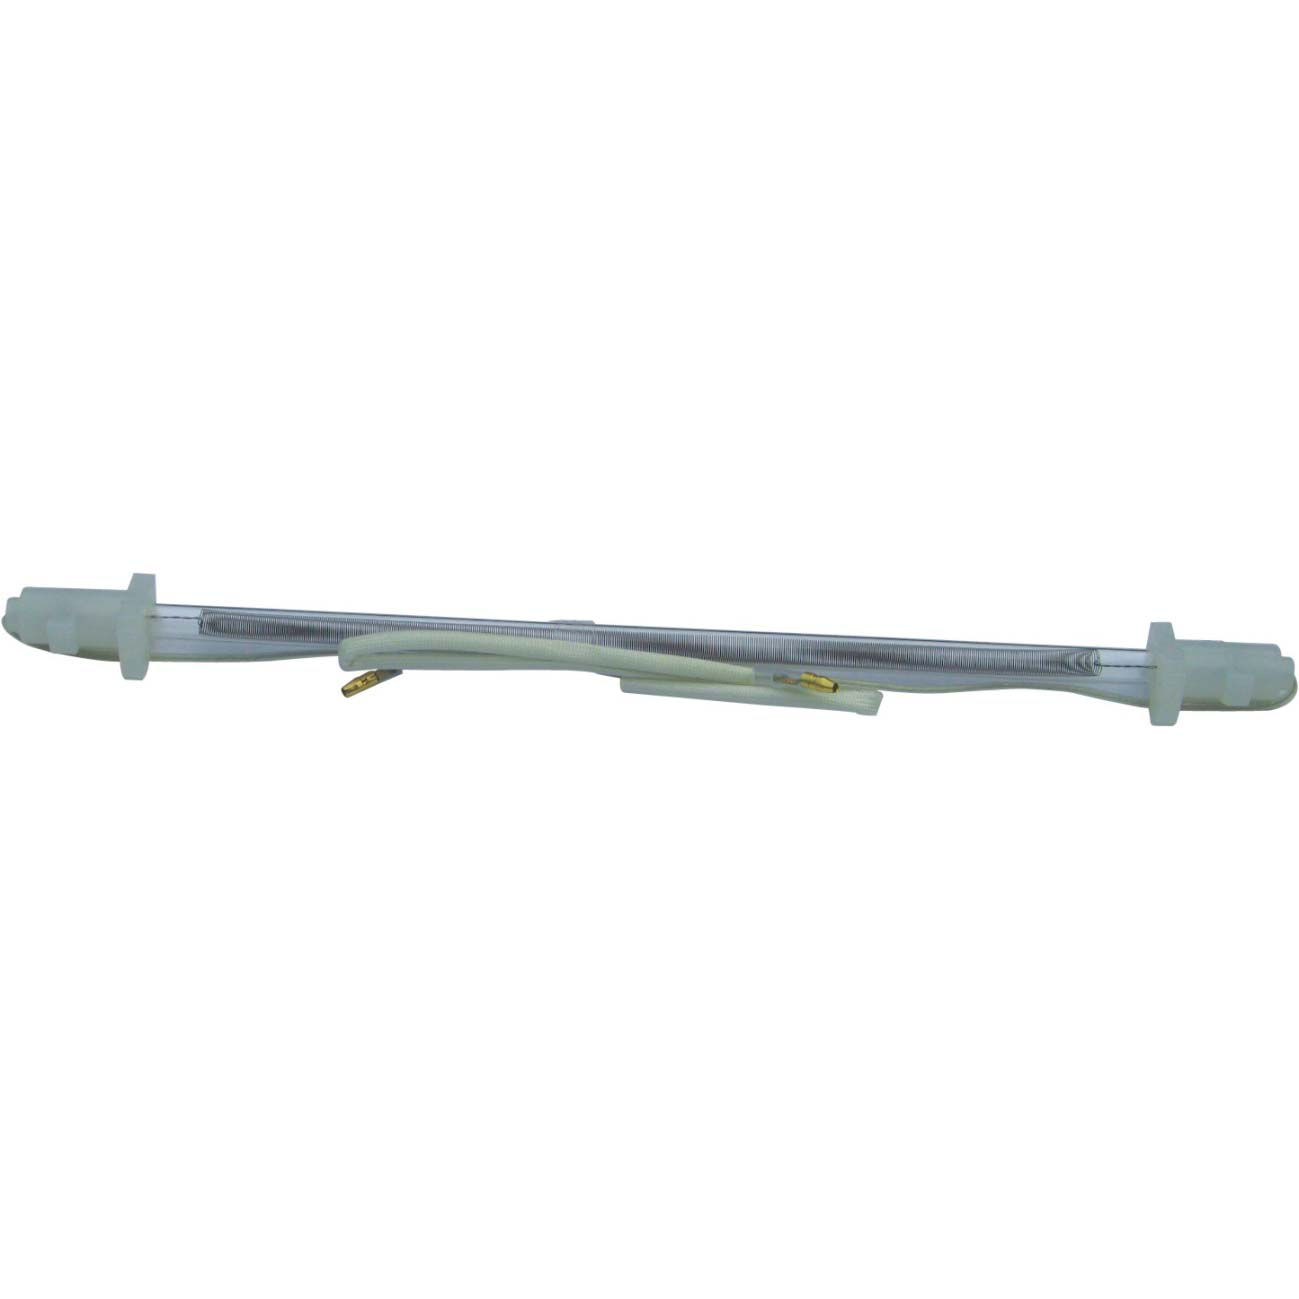 Defrosting heating tube (NO:D-002)